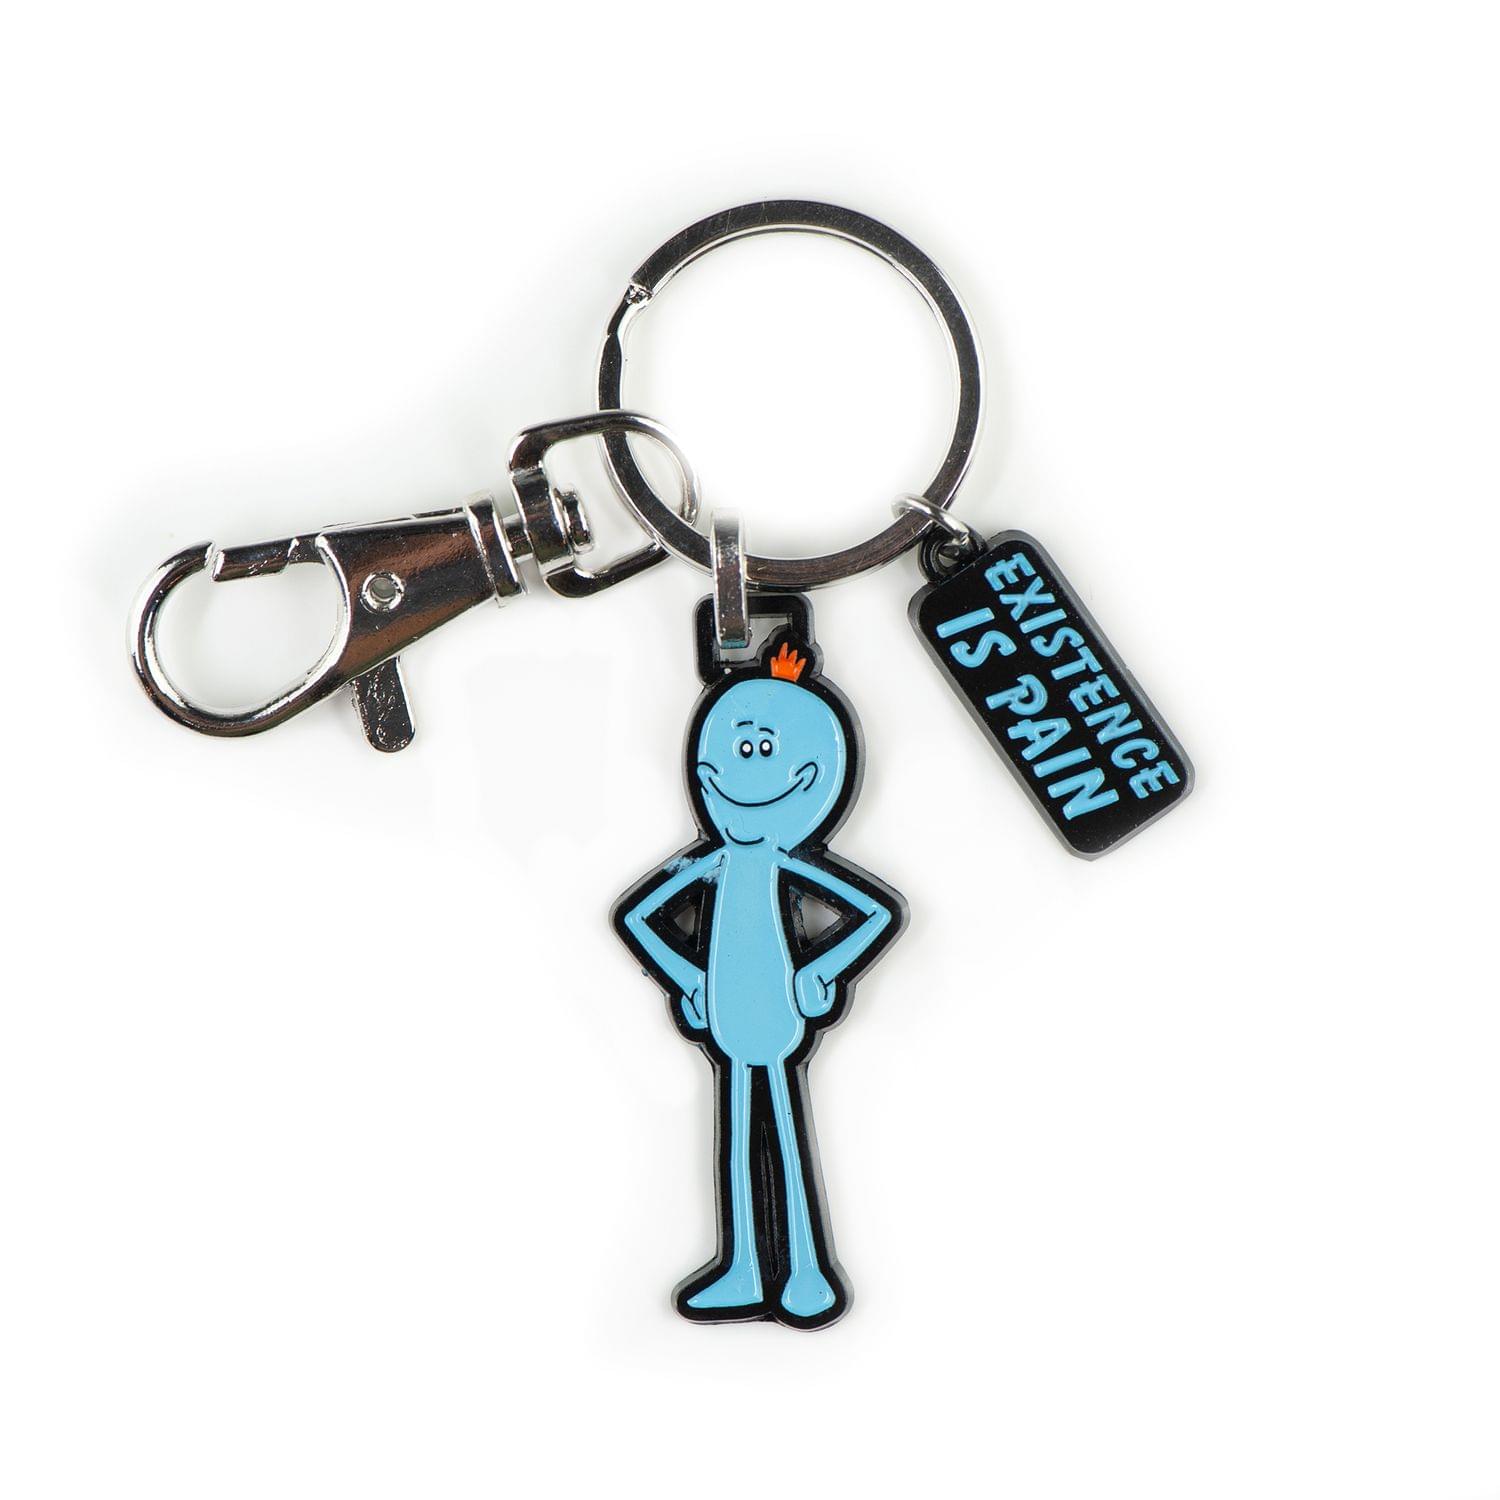 Rick and Morty Collectibles | Rick and Morty Mr. Meeseeks Keychain